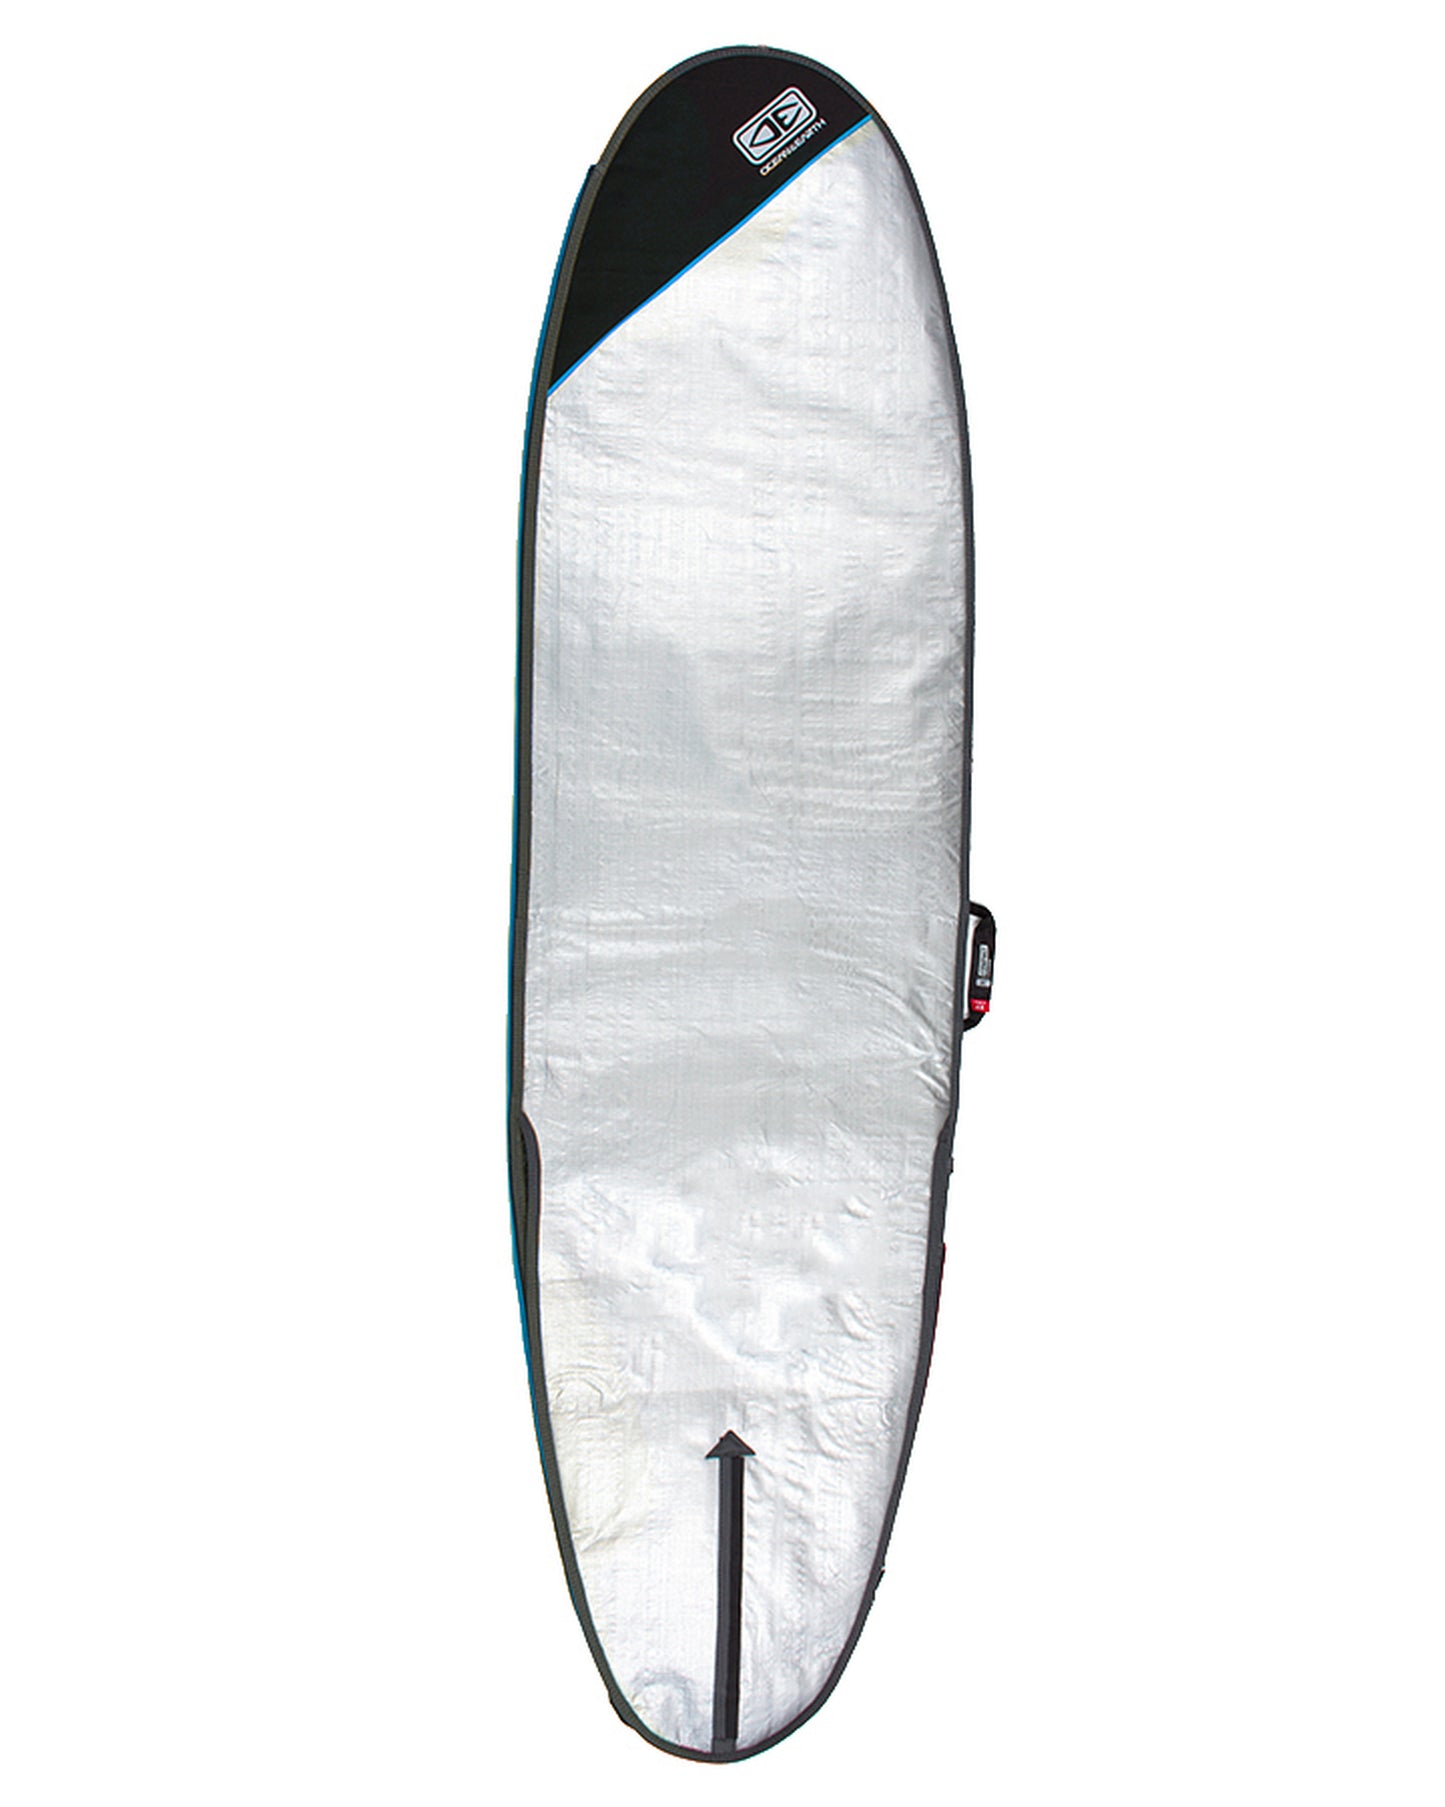 COMPACT DAY LONGBOARD COVER